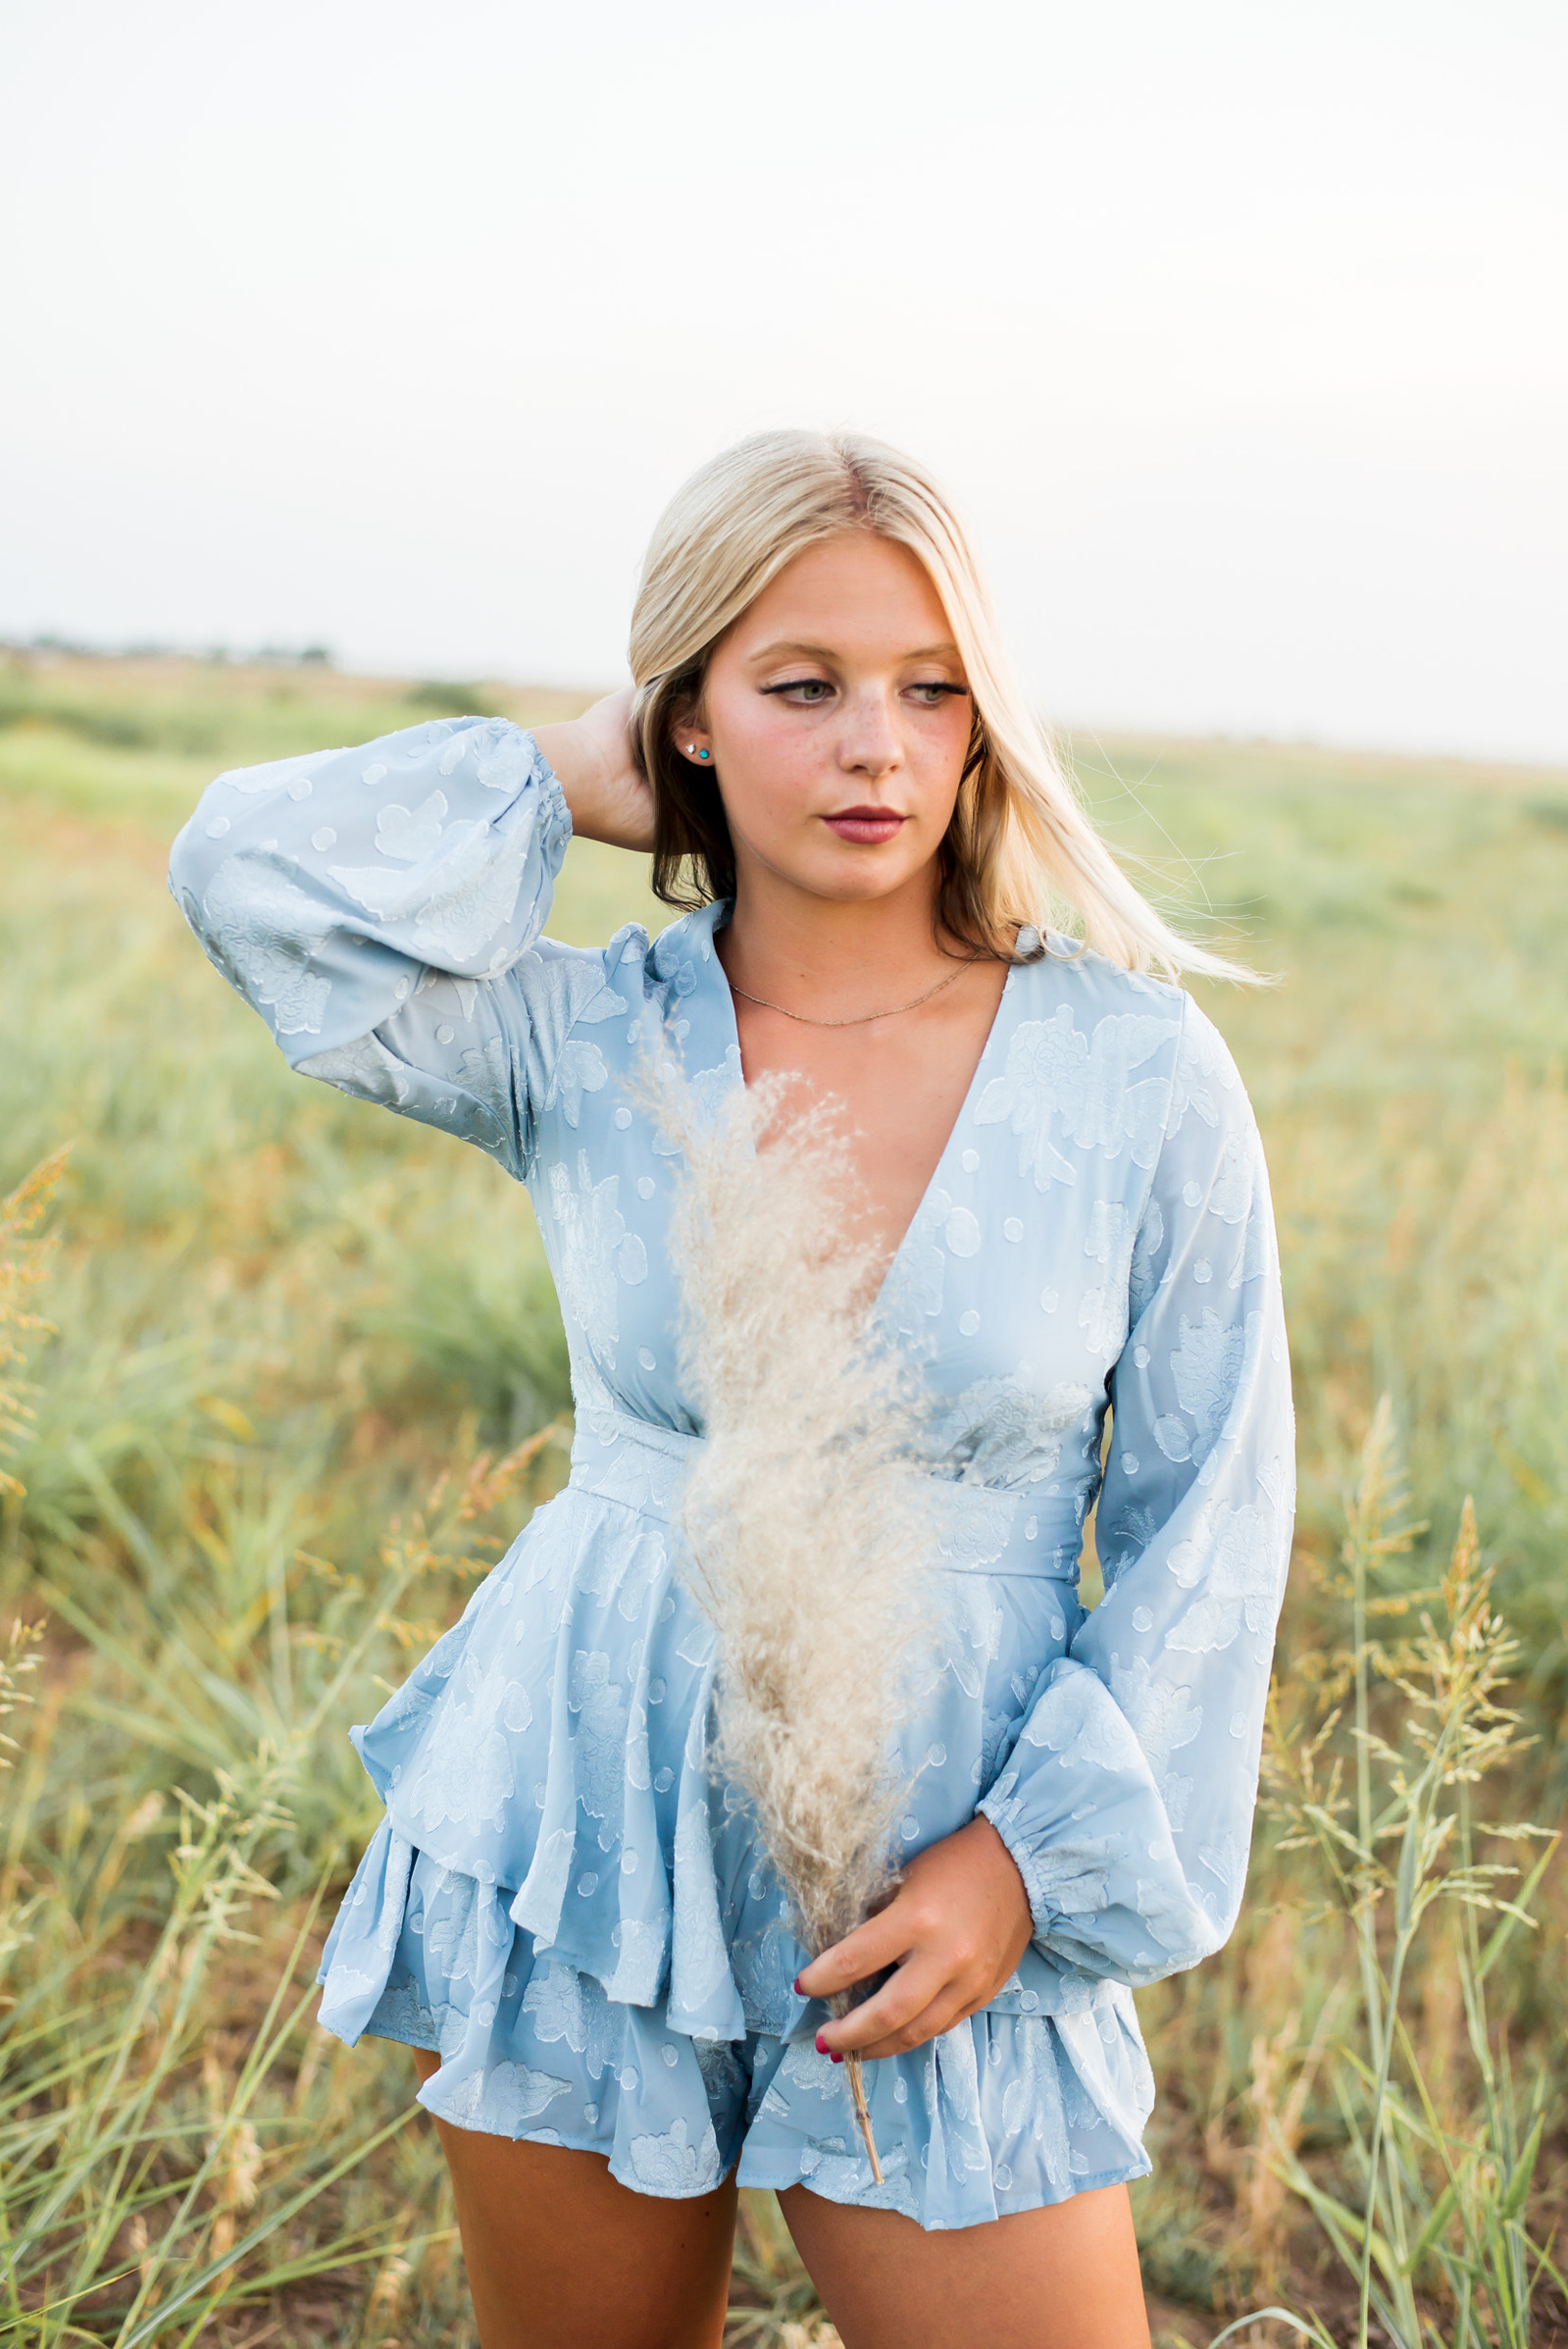 high school senior girl wearing a blue romper holds a piece of pampa grass and looks to the side with blonde hair blowing standing in a field in the country near Tuttle Oklahoma